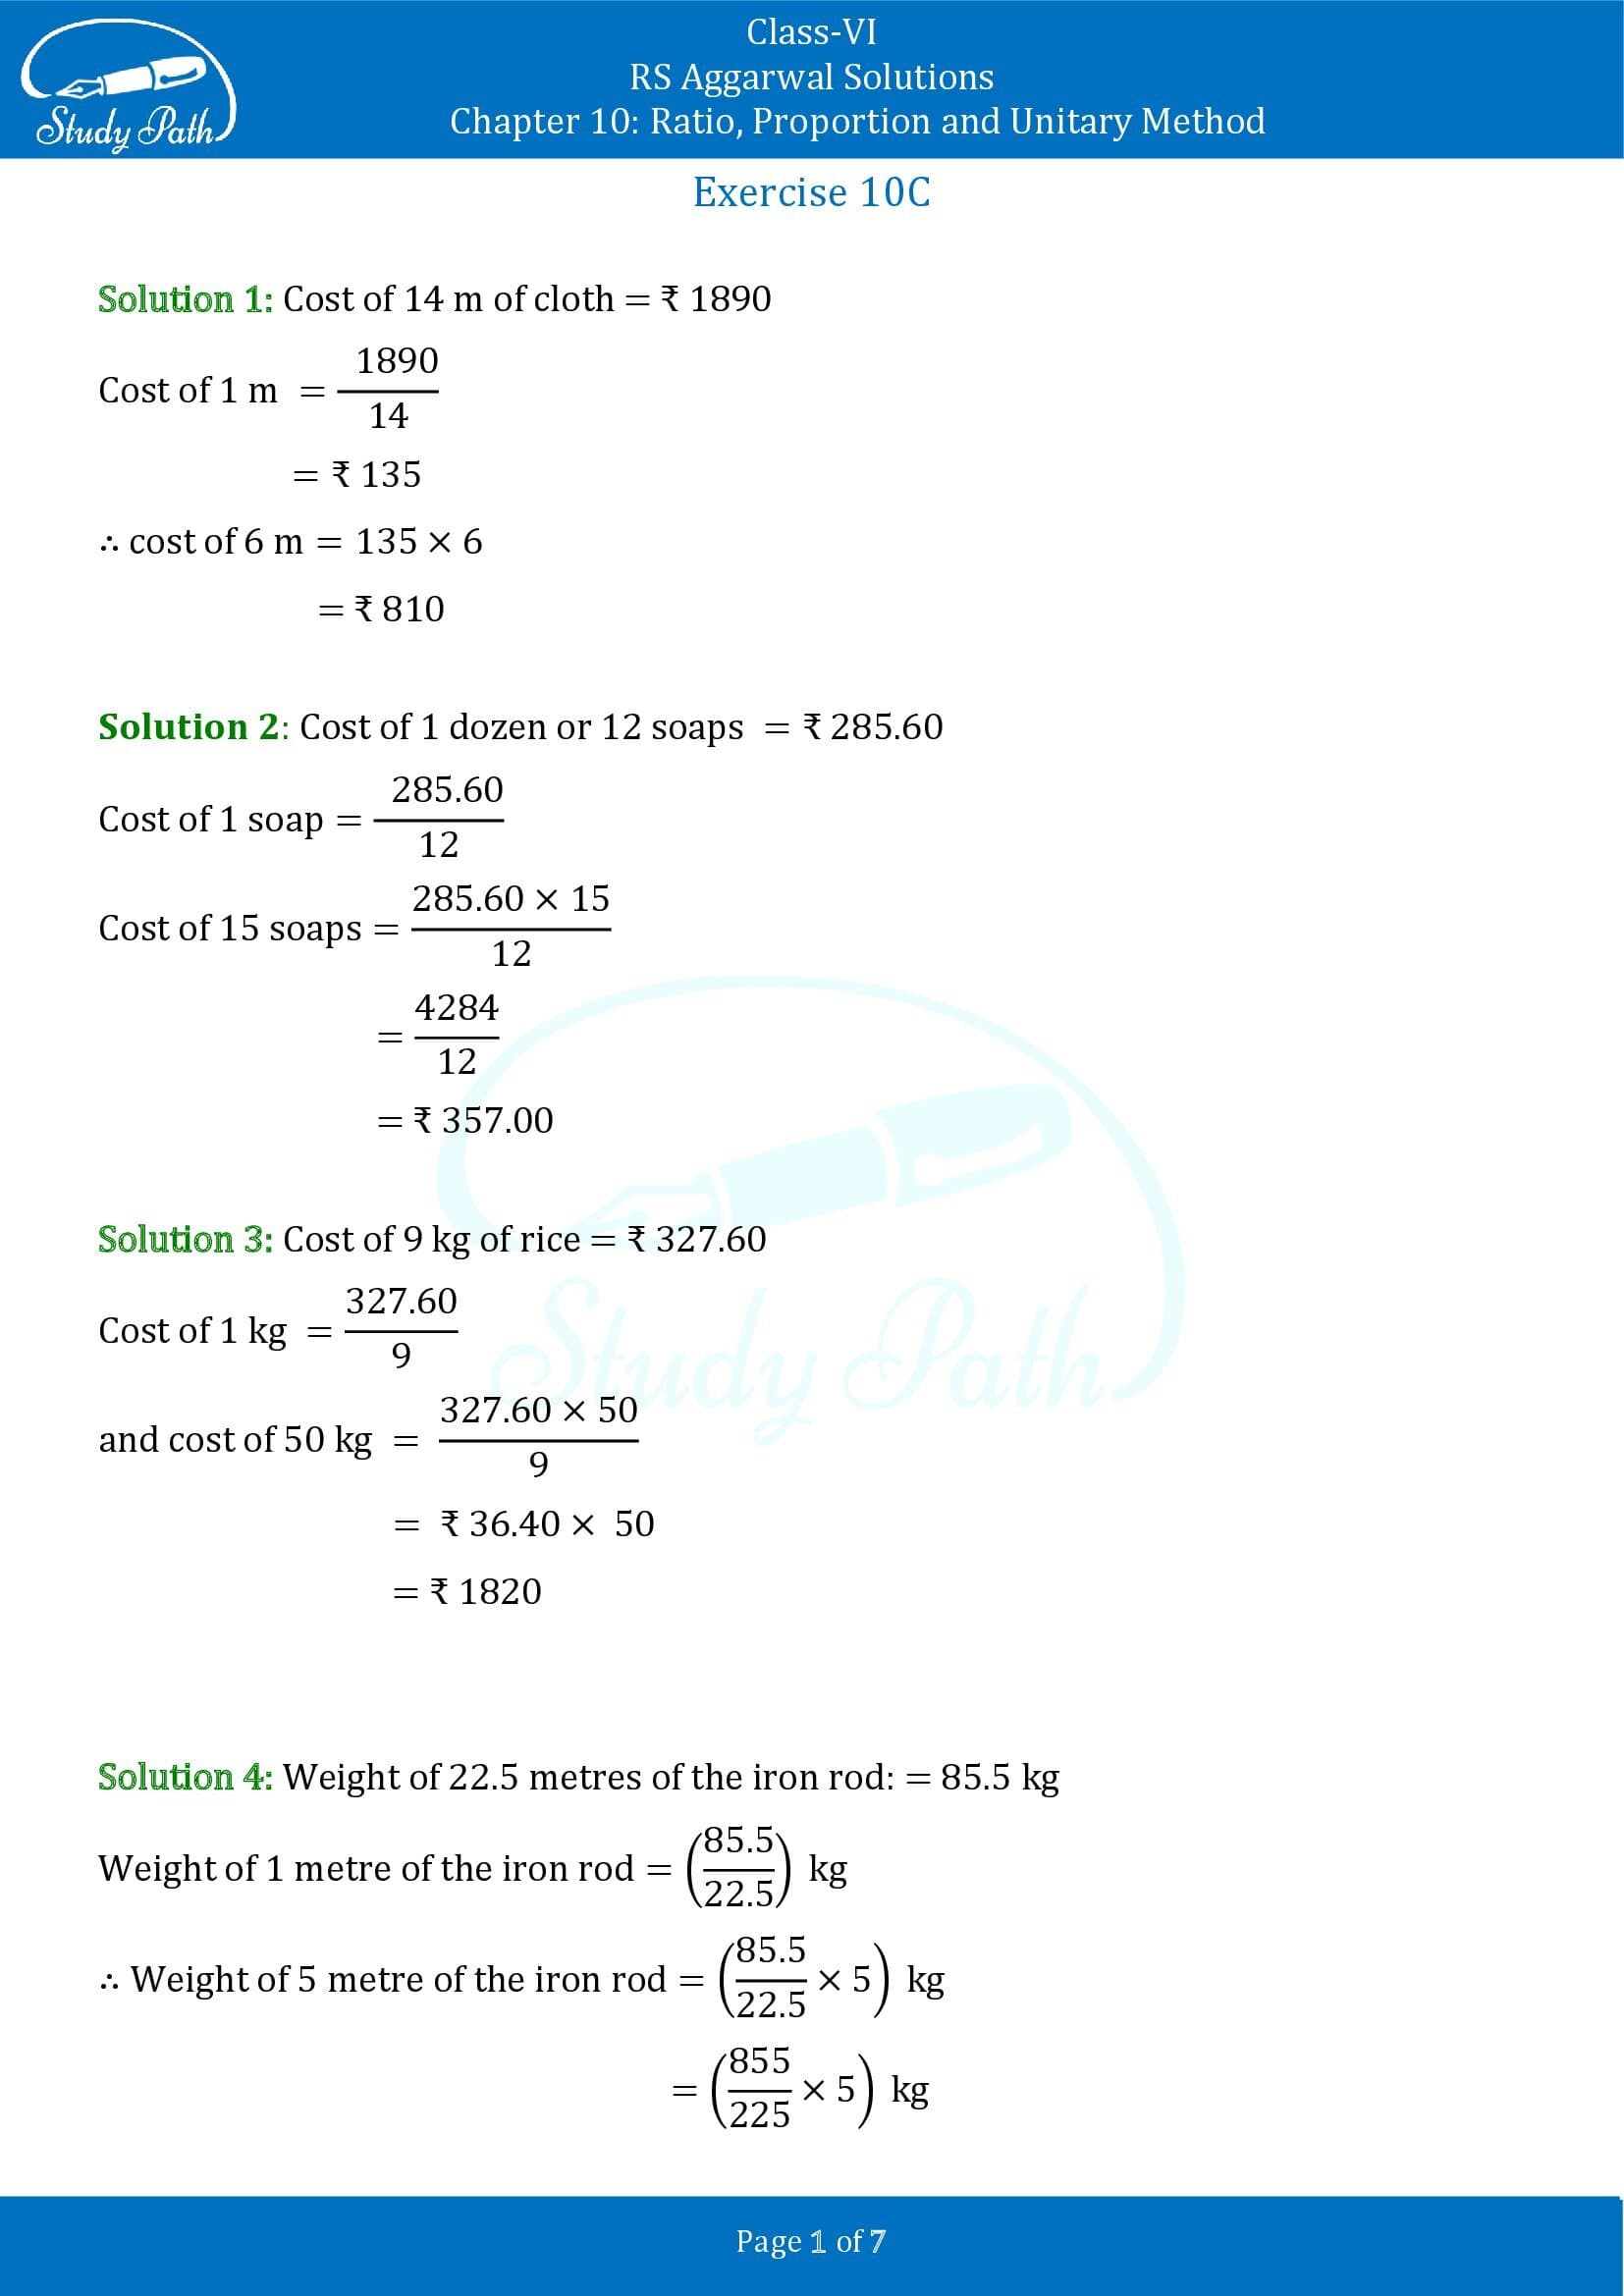 RS Aggarwal Solutions Class 6 Chapter 10 Ratio Proportion and Unitary Method Exercise 10C 00001